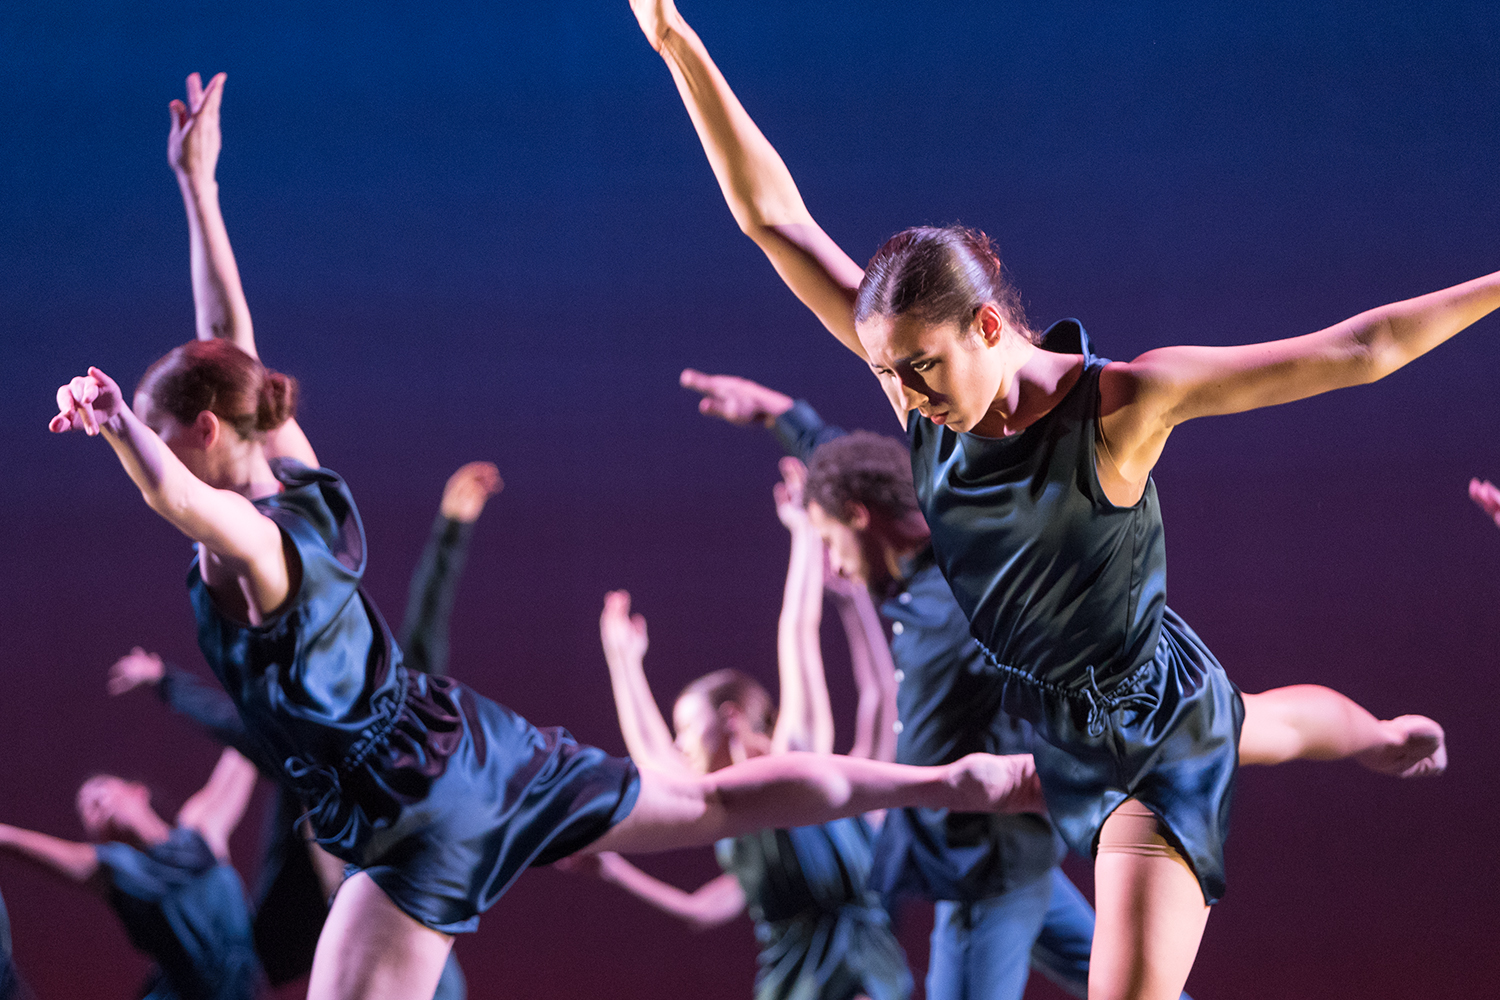  Students in the University of Iowa's Department of Dance perform in Dance Gala 2018 in Space Place Theater on Monday, Oct. 8, 2018.  